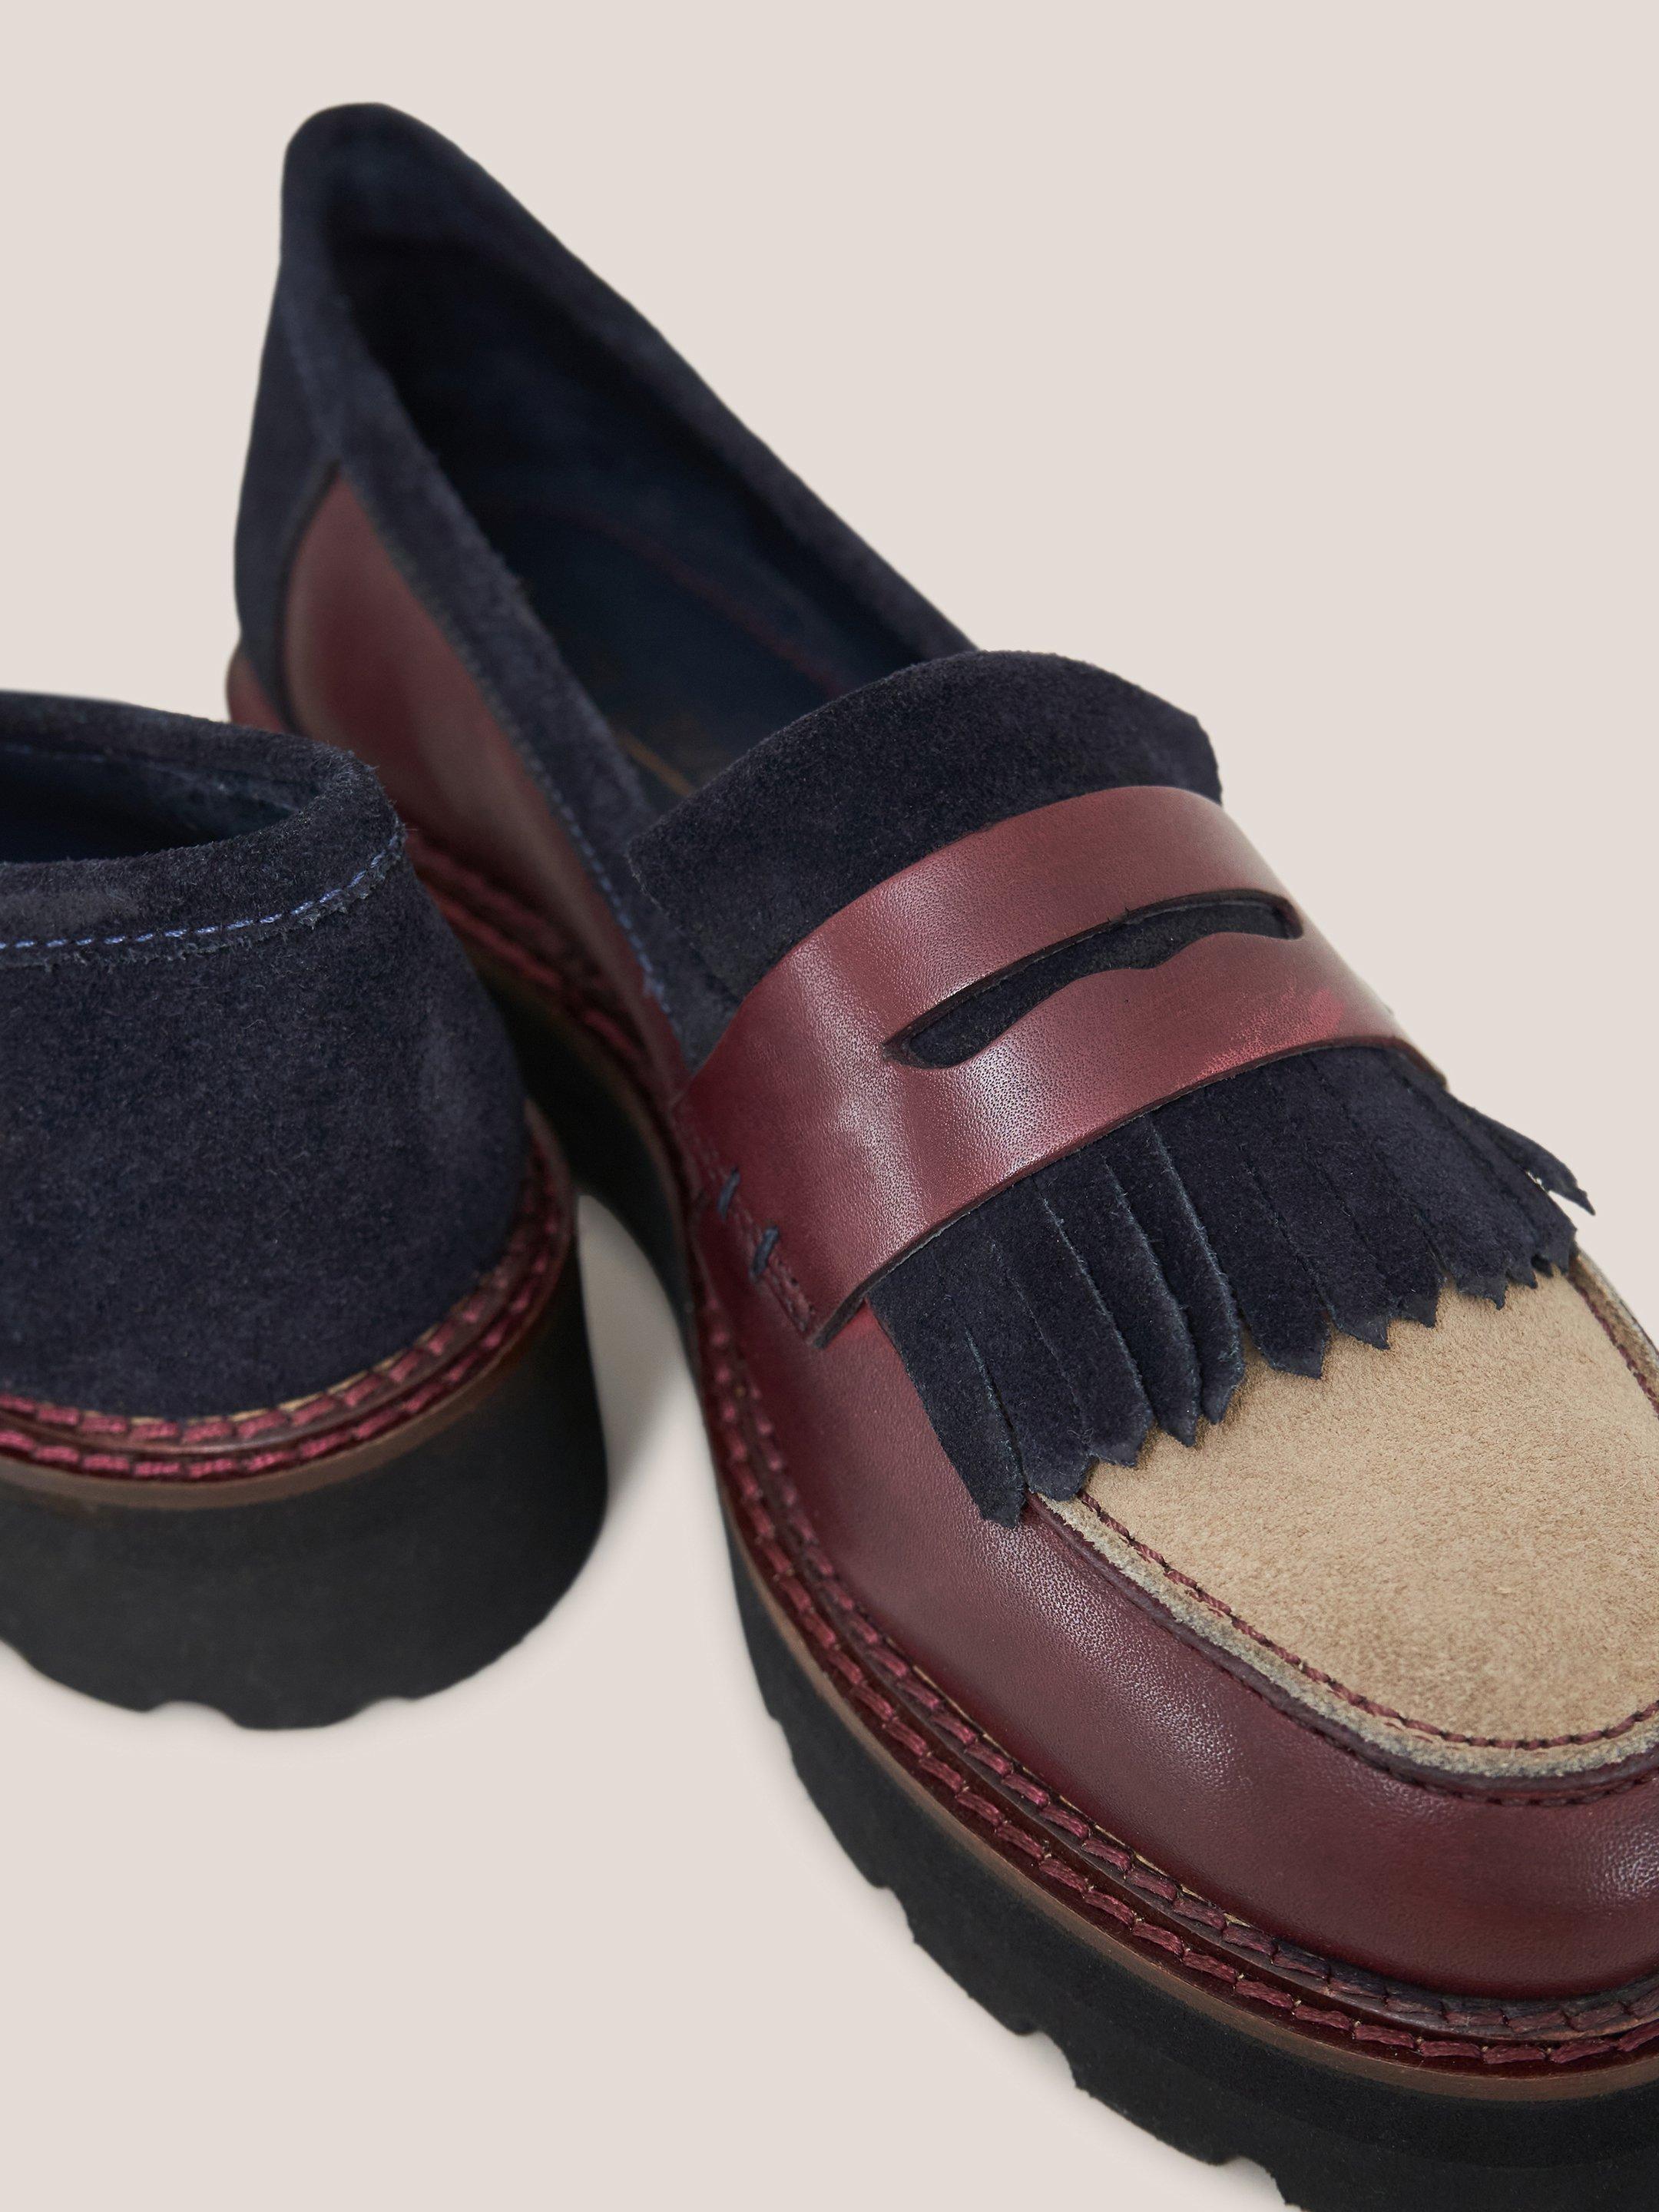 Elva Chunky Leather Mix Loafer in NAVY MULTI - FLAT DETAIL